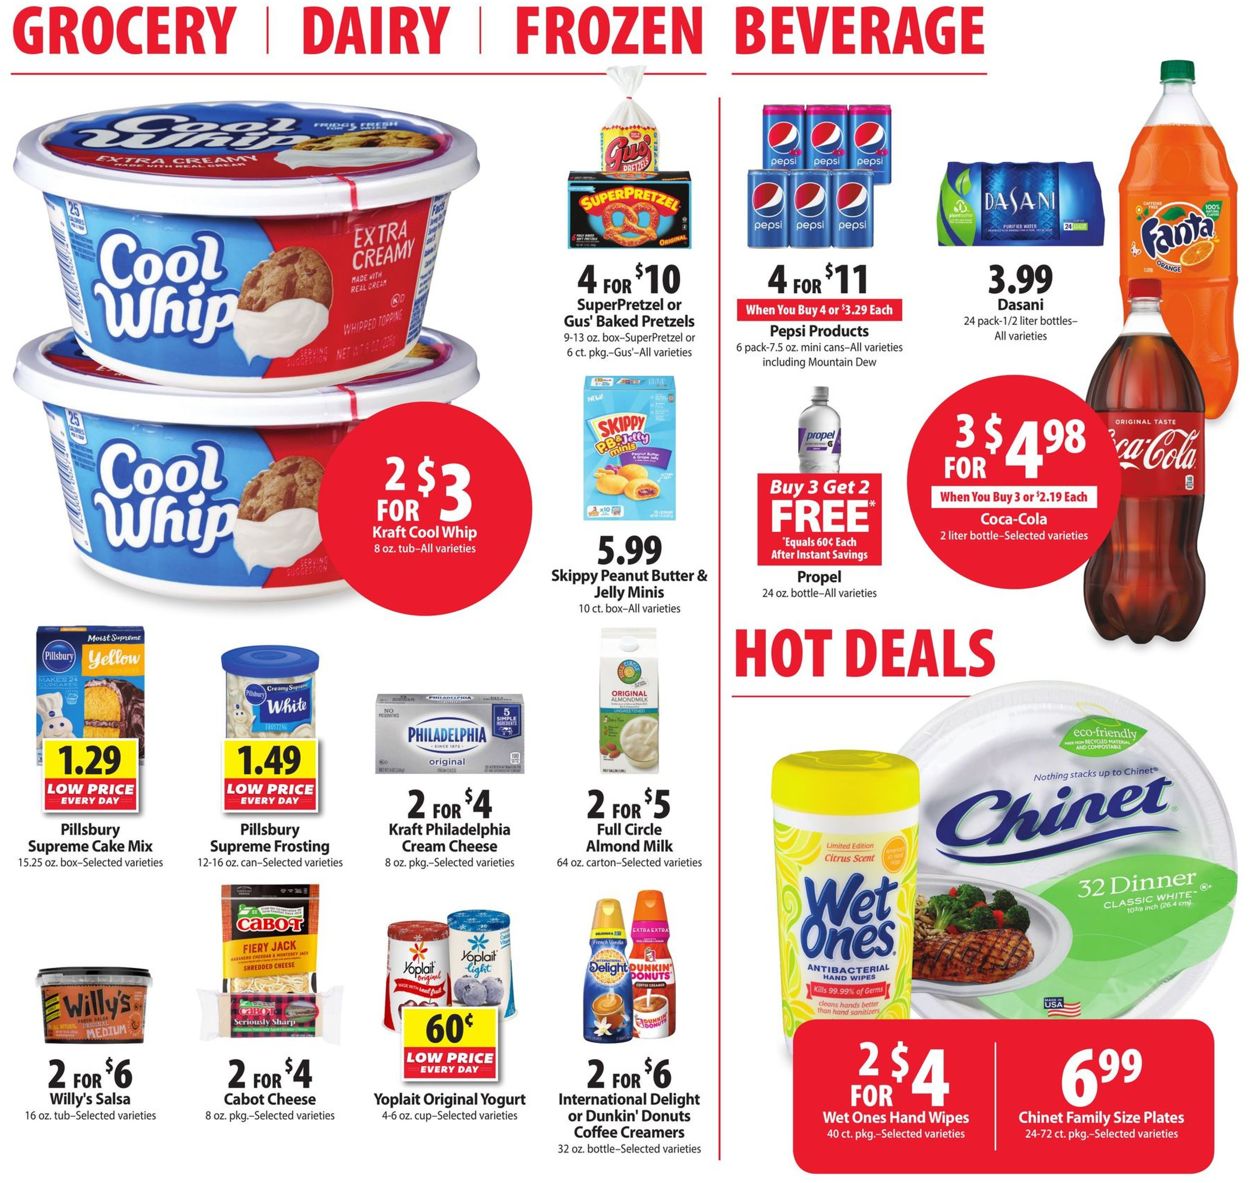 Schnucks Current weekly ad 06/26 - 07/04/2019 [6] - frequent-ads.com